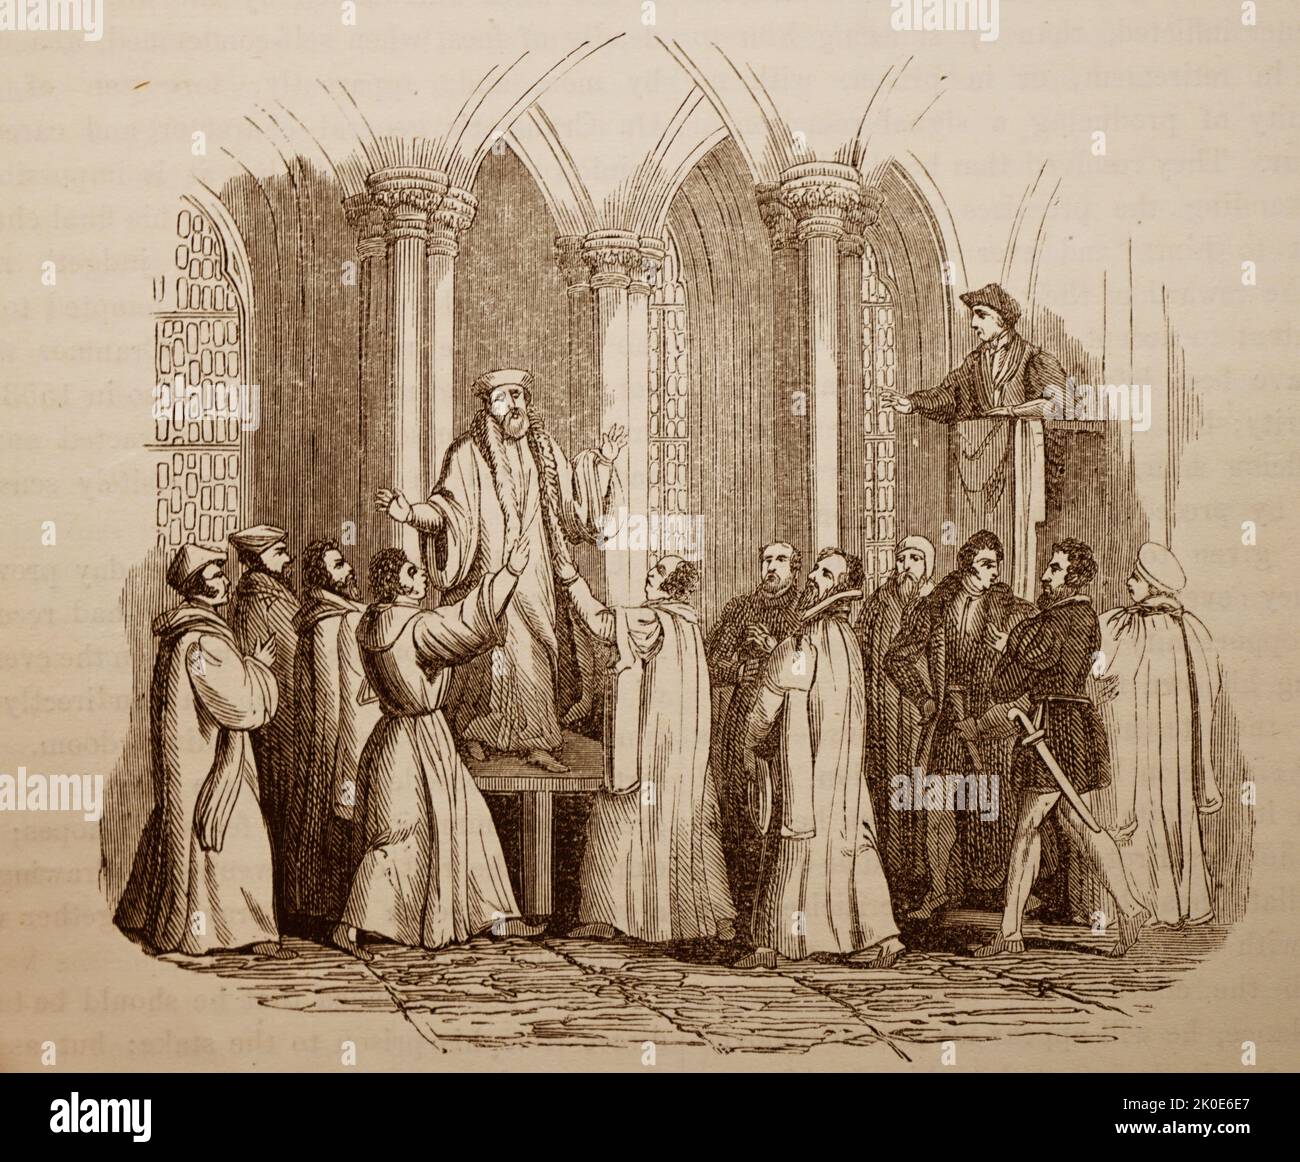 Execution of Thomas Cranmer (1489 - 1556) leader of the English Reformation and Archbishop of Canterbury during the reigns of Henry VIII, Edward VI and, for a short time, Mary I. Stock Photo